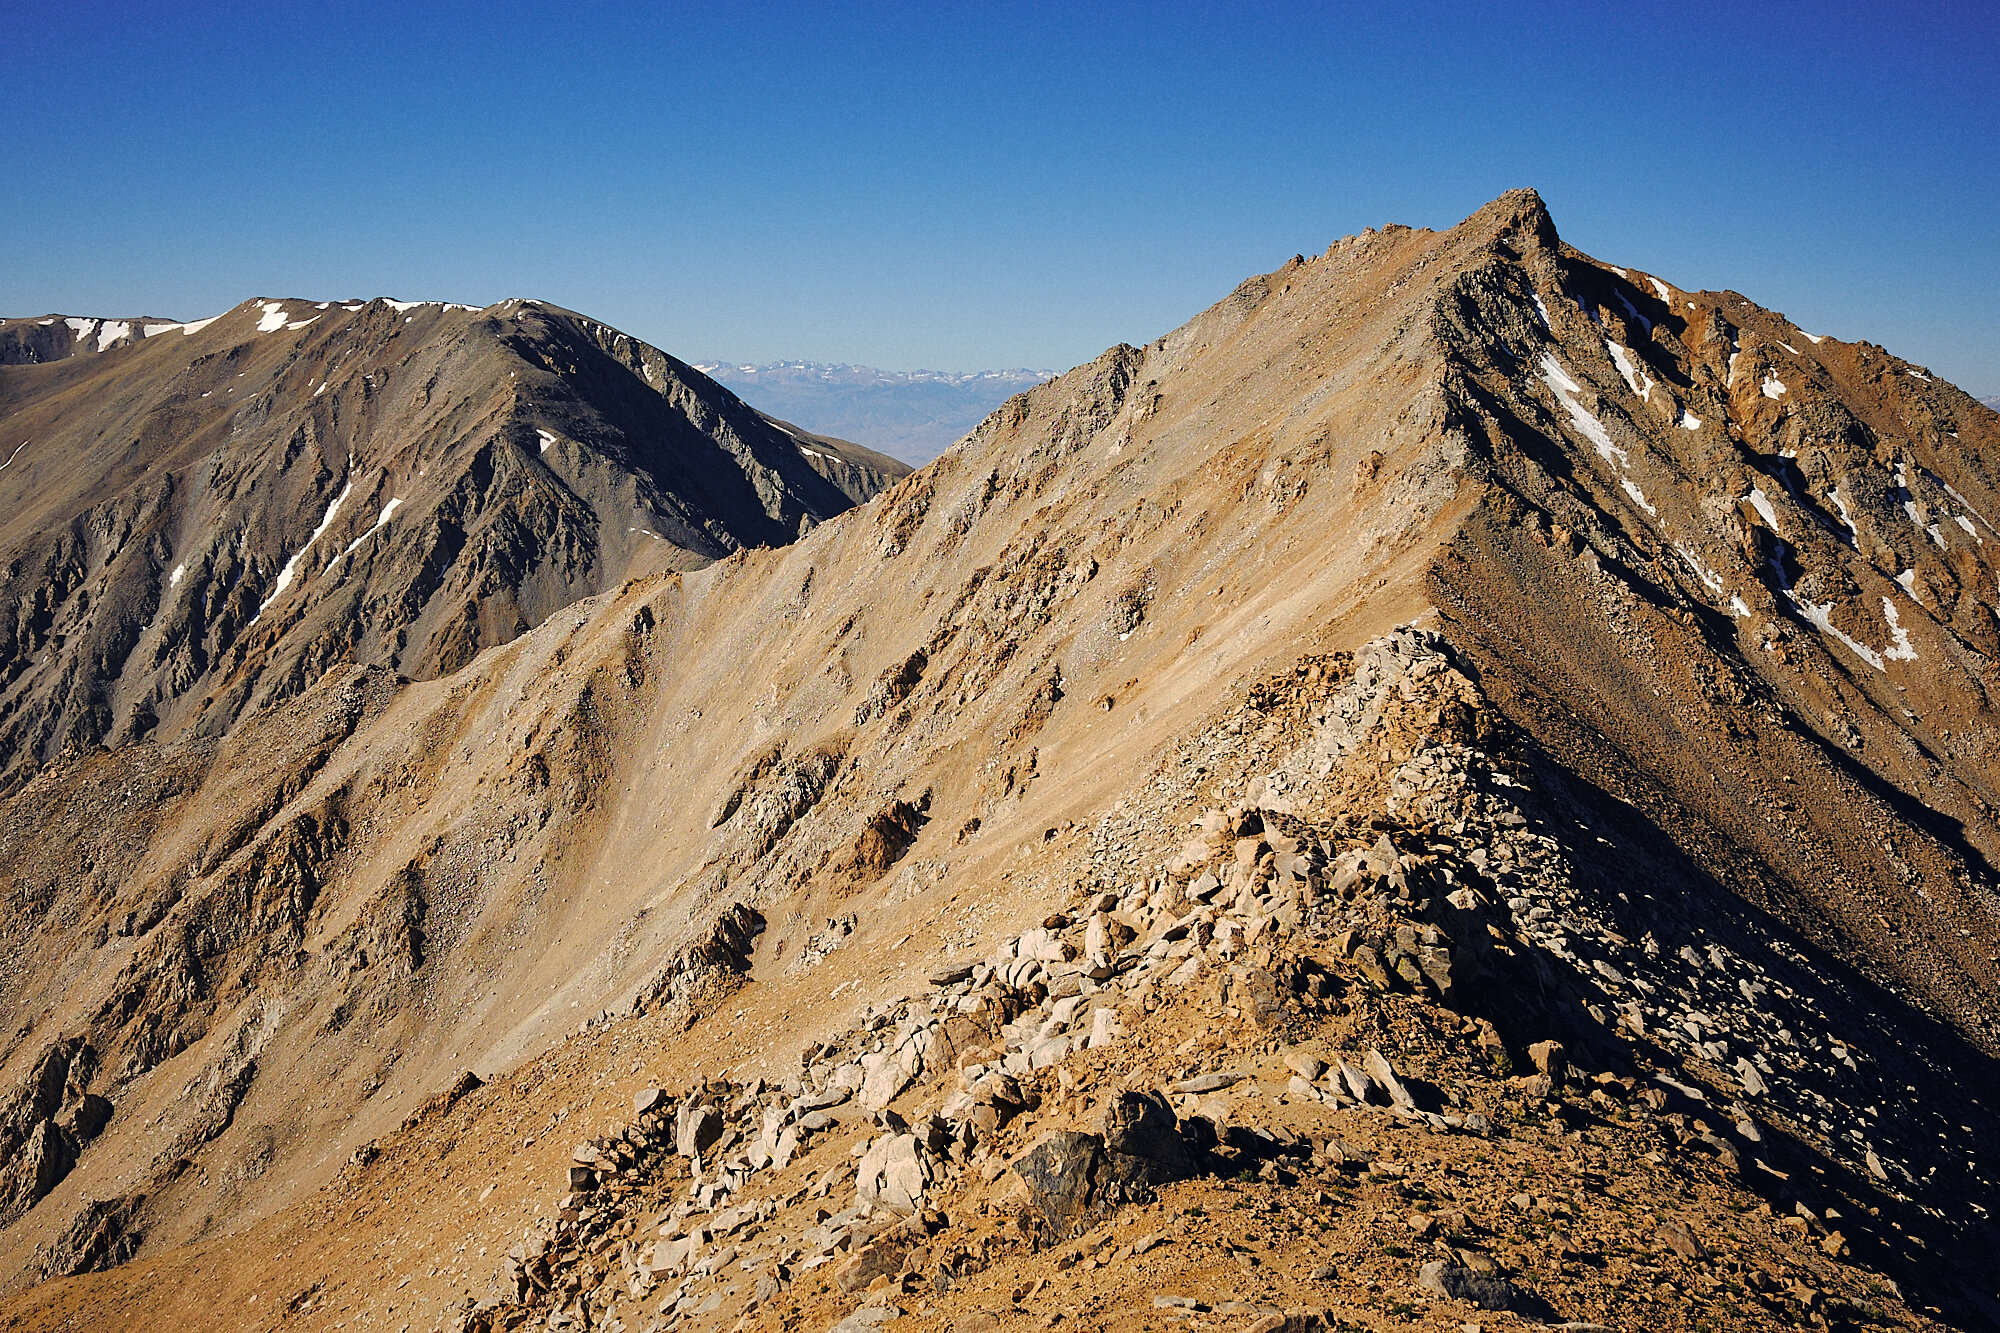  The view east into California from Boundary Peak, the highest in Nevada at 13,146’. The Sierra is visible in the background across Owens Valley. | 7/9/20 Esmeralda County, NV 